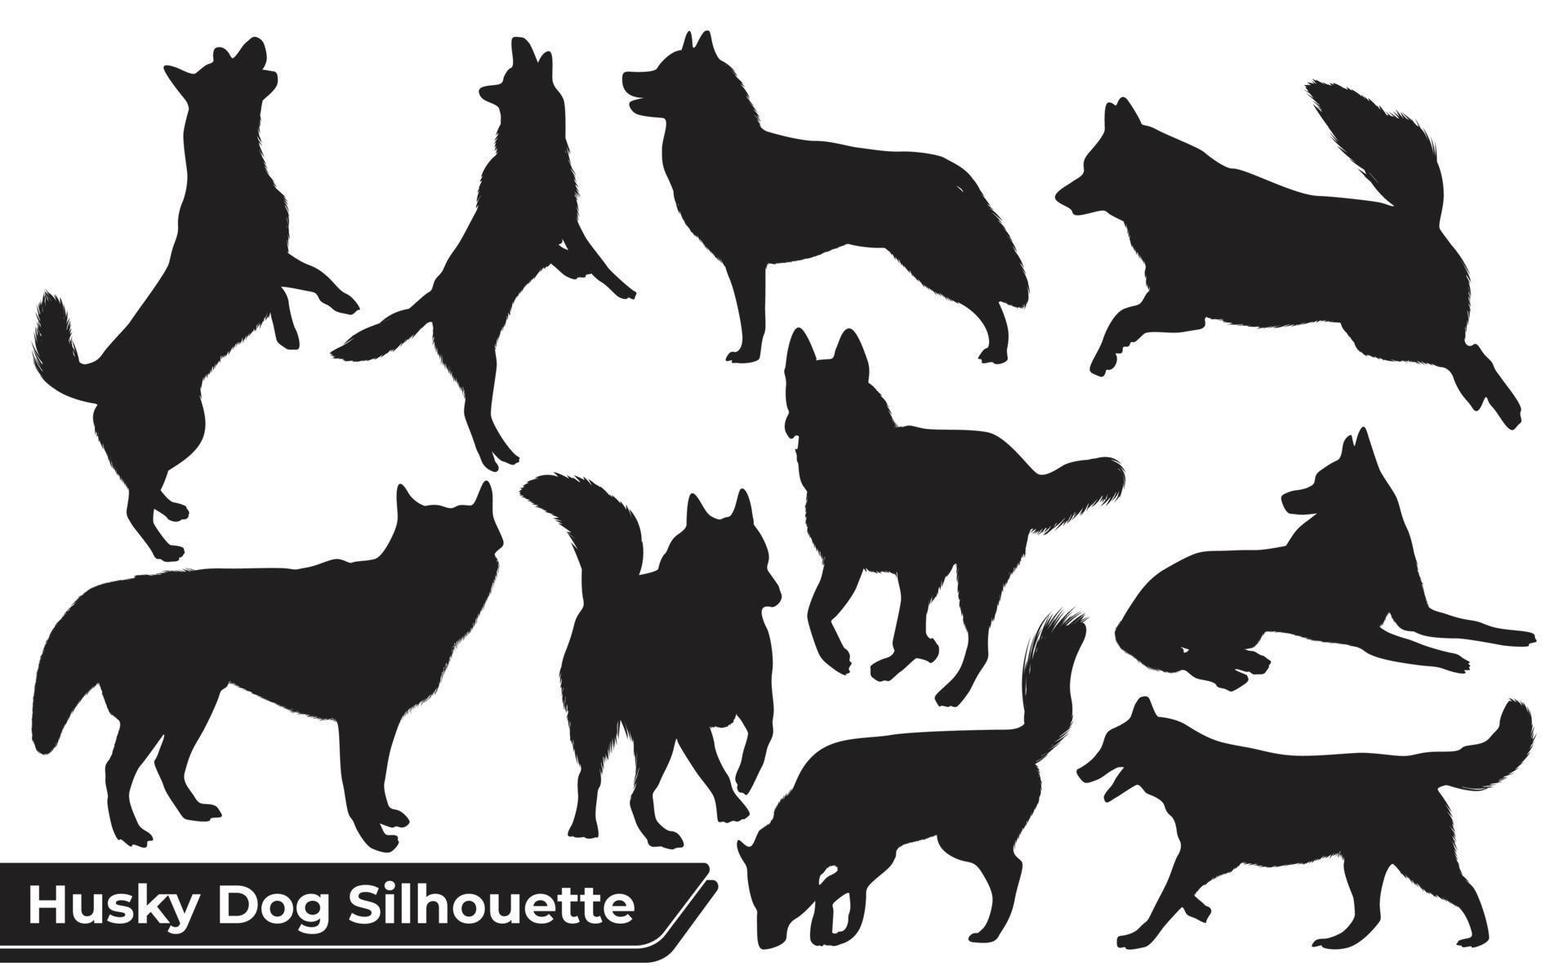 Collection of animal Husky Dog in different positions vector